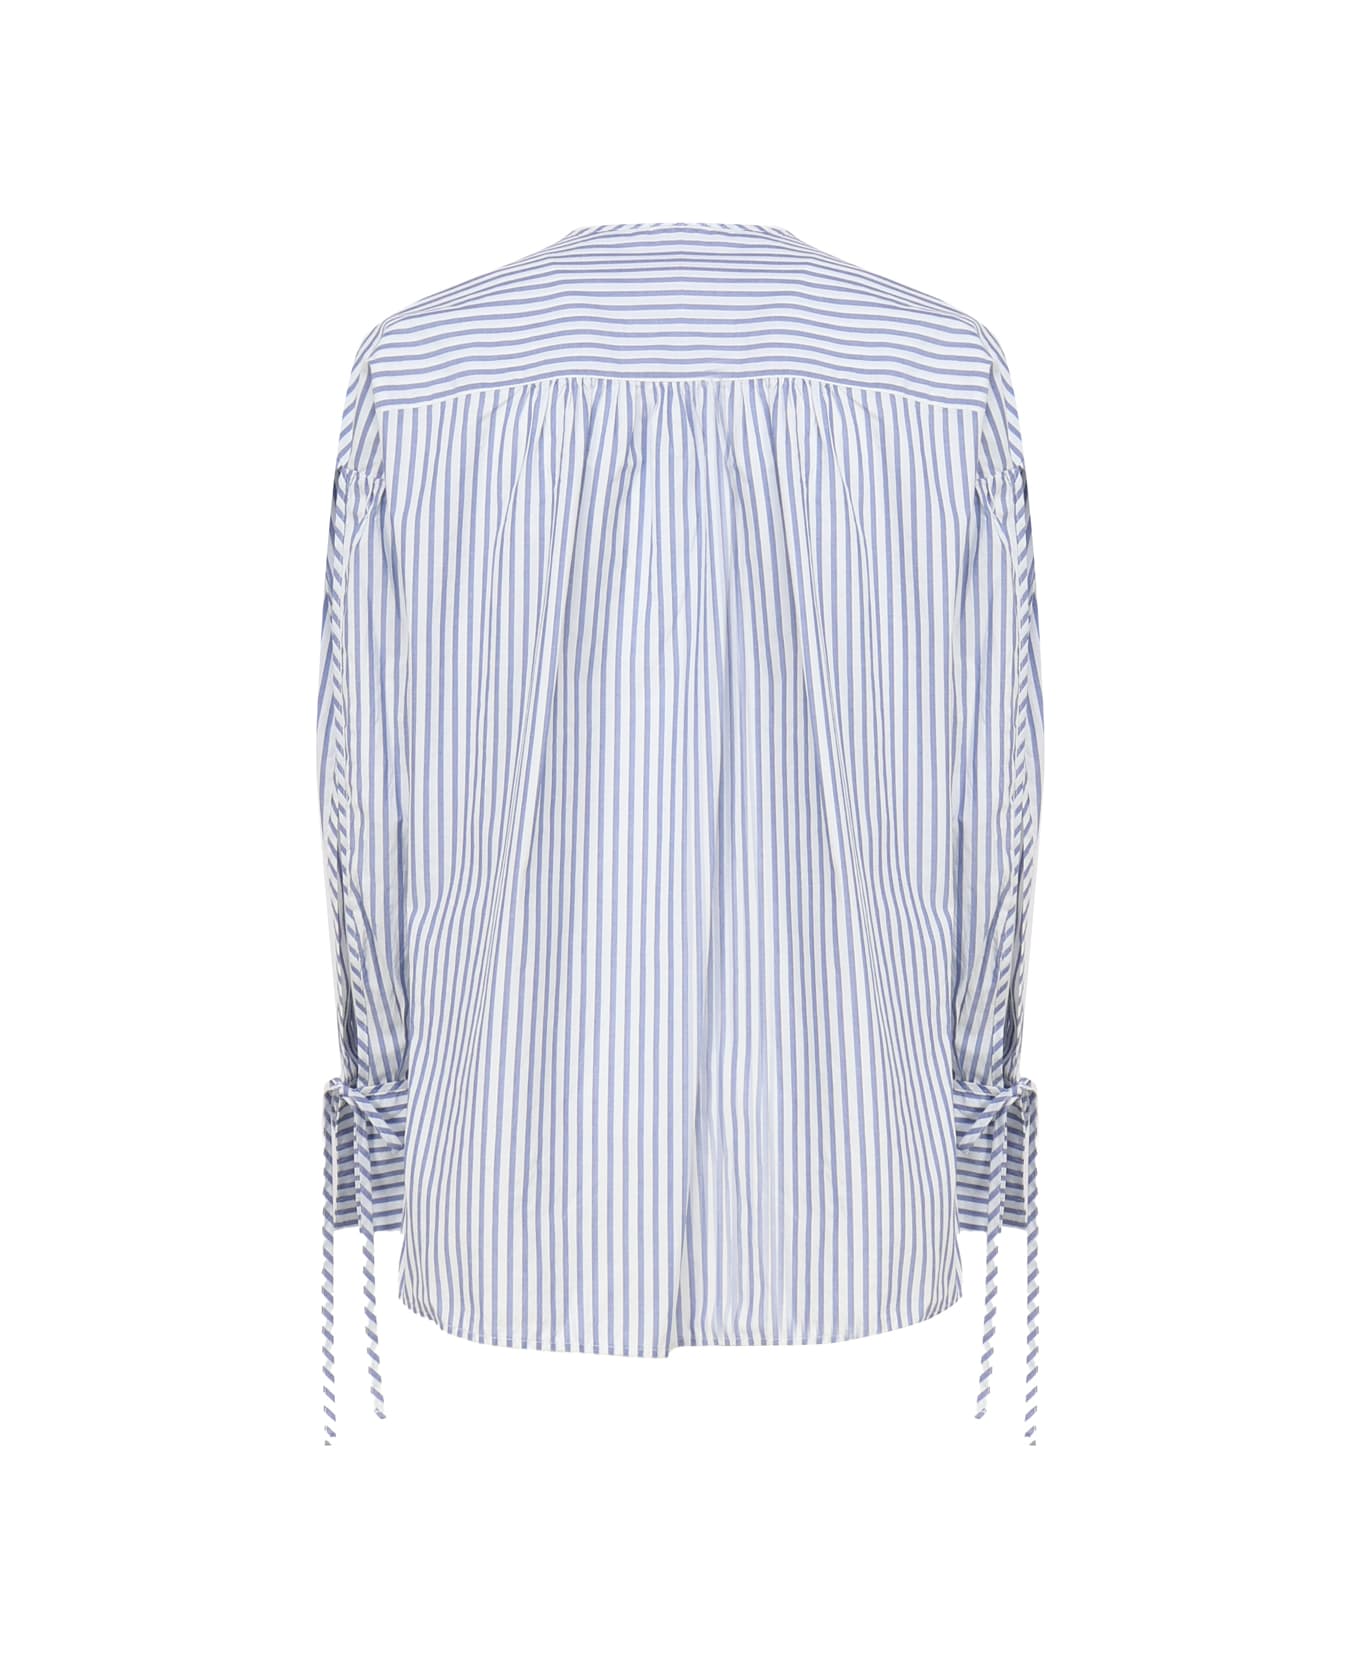 Pinko Striped Shirt With Bare Shoulders - Light blue, white